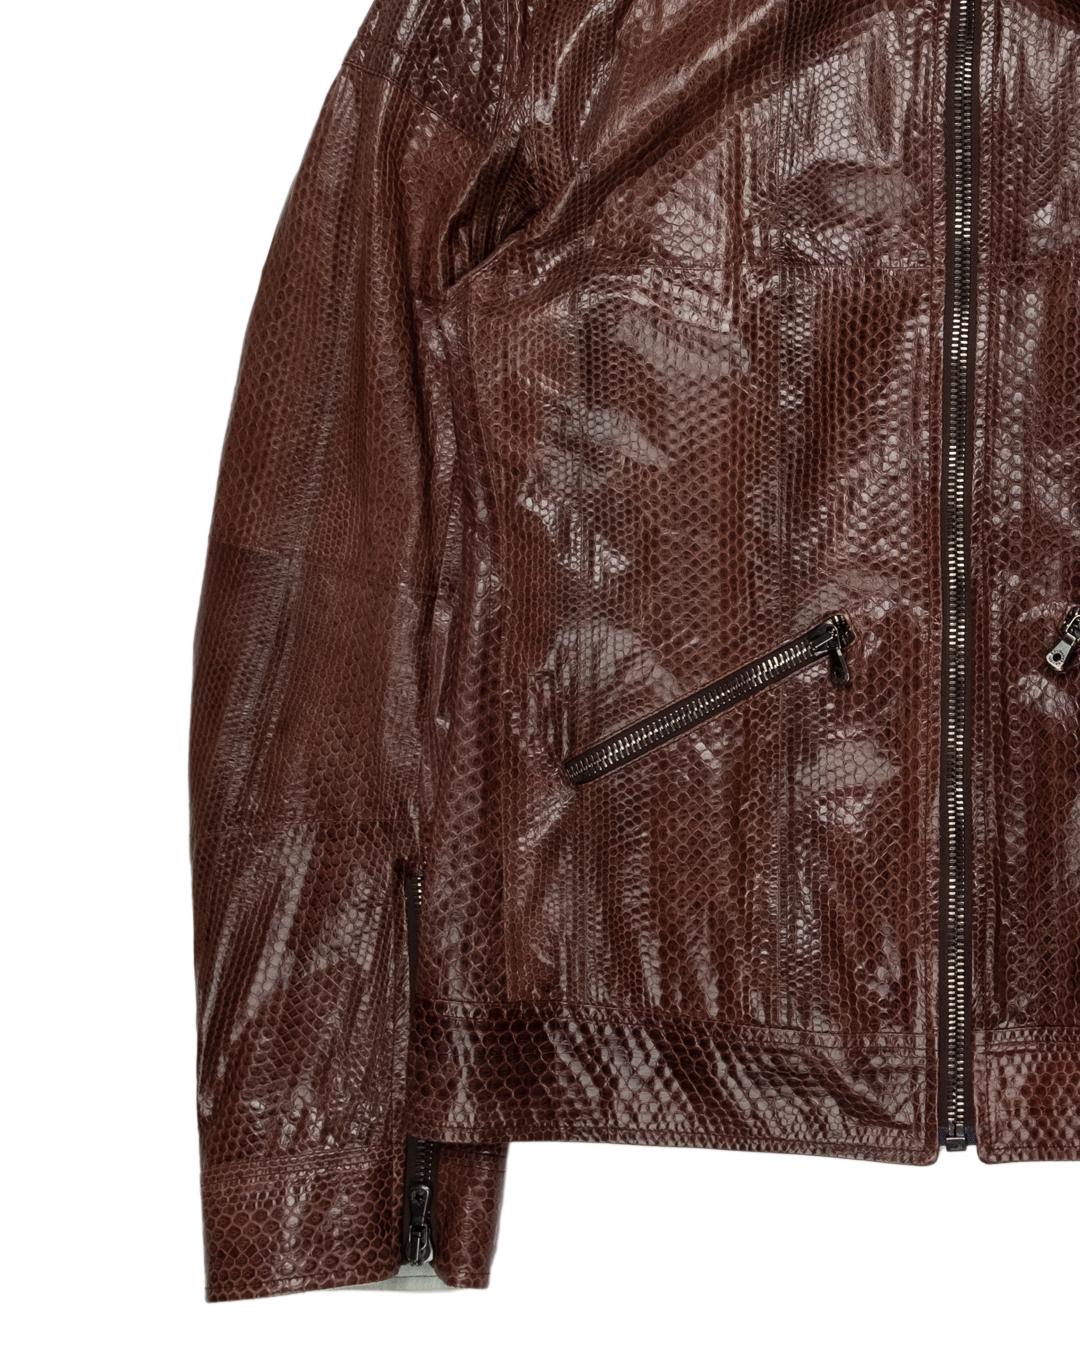 Dolce & Gabbana AW2005 Real Python Leather Jacket In Good Condition For Sale In Beverly Hills, CA